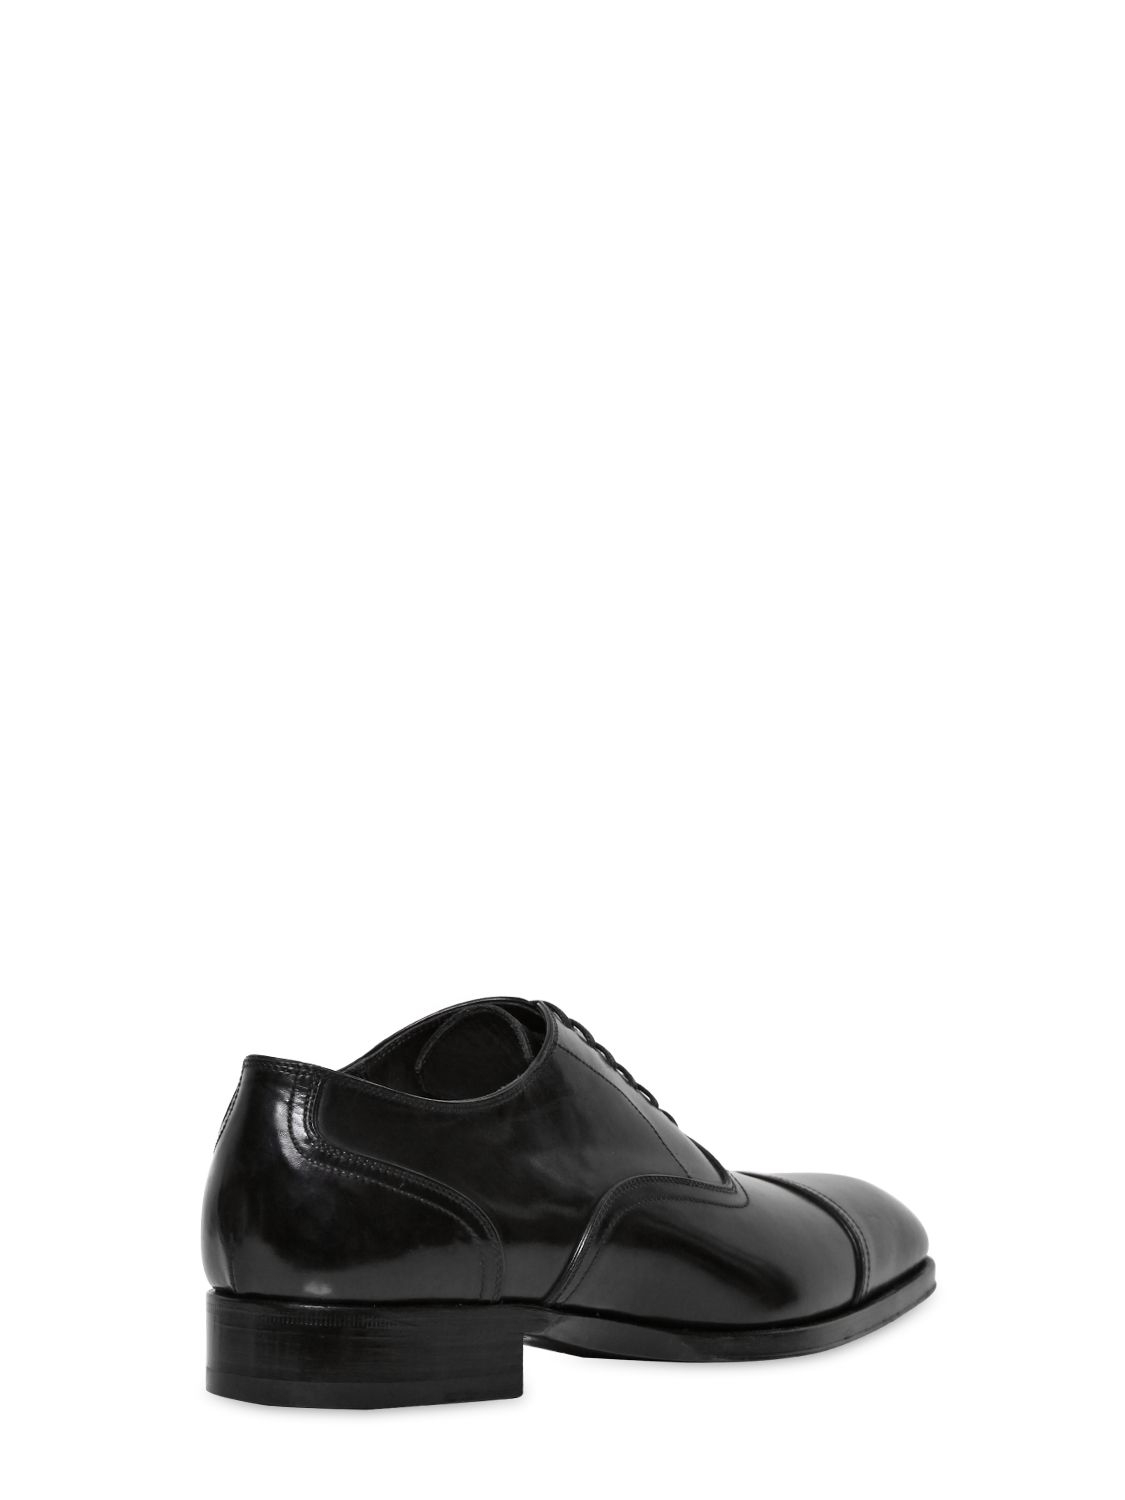 Lyst - Max Verre Brushed Calfskin Oxford Lace Up Shoes in Black for Men